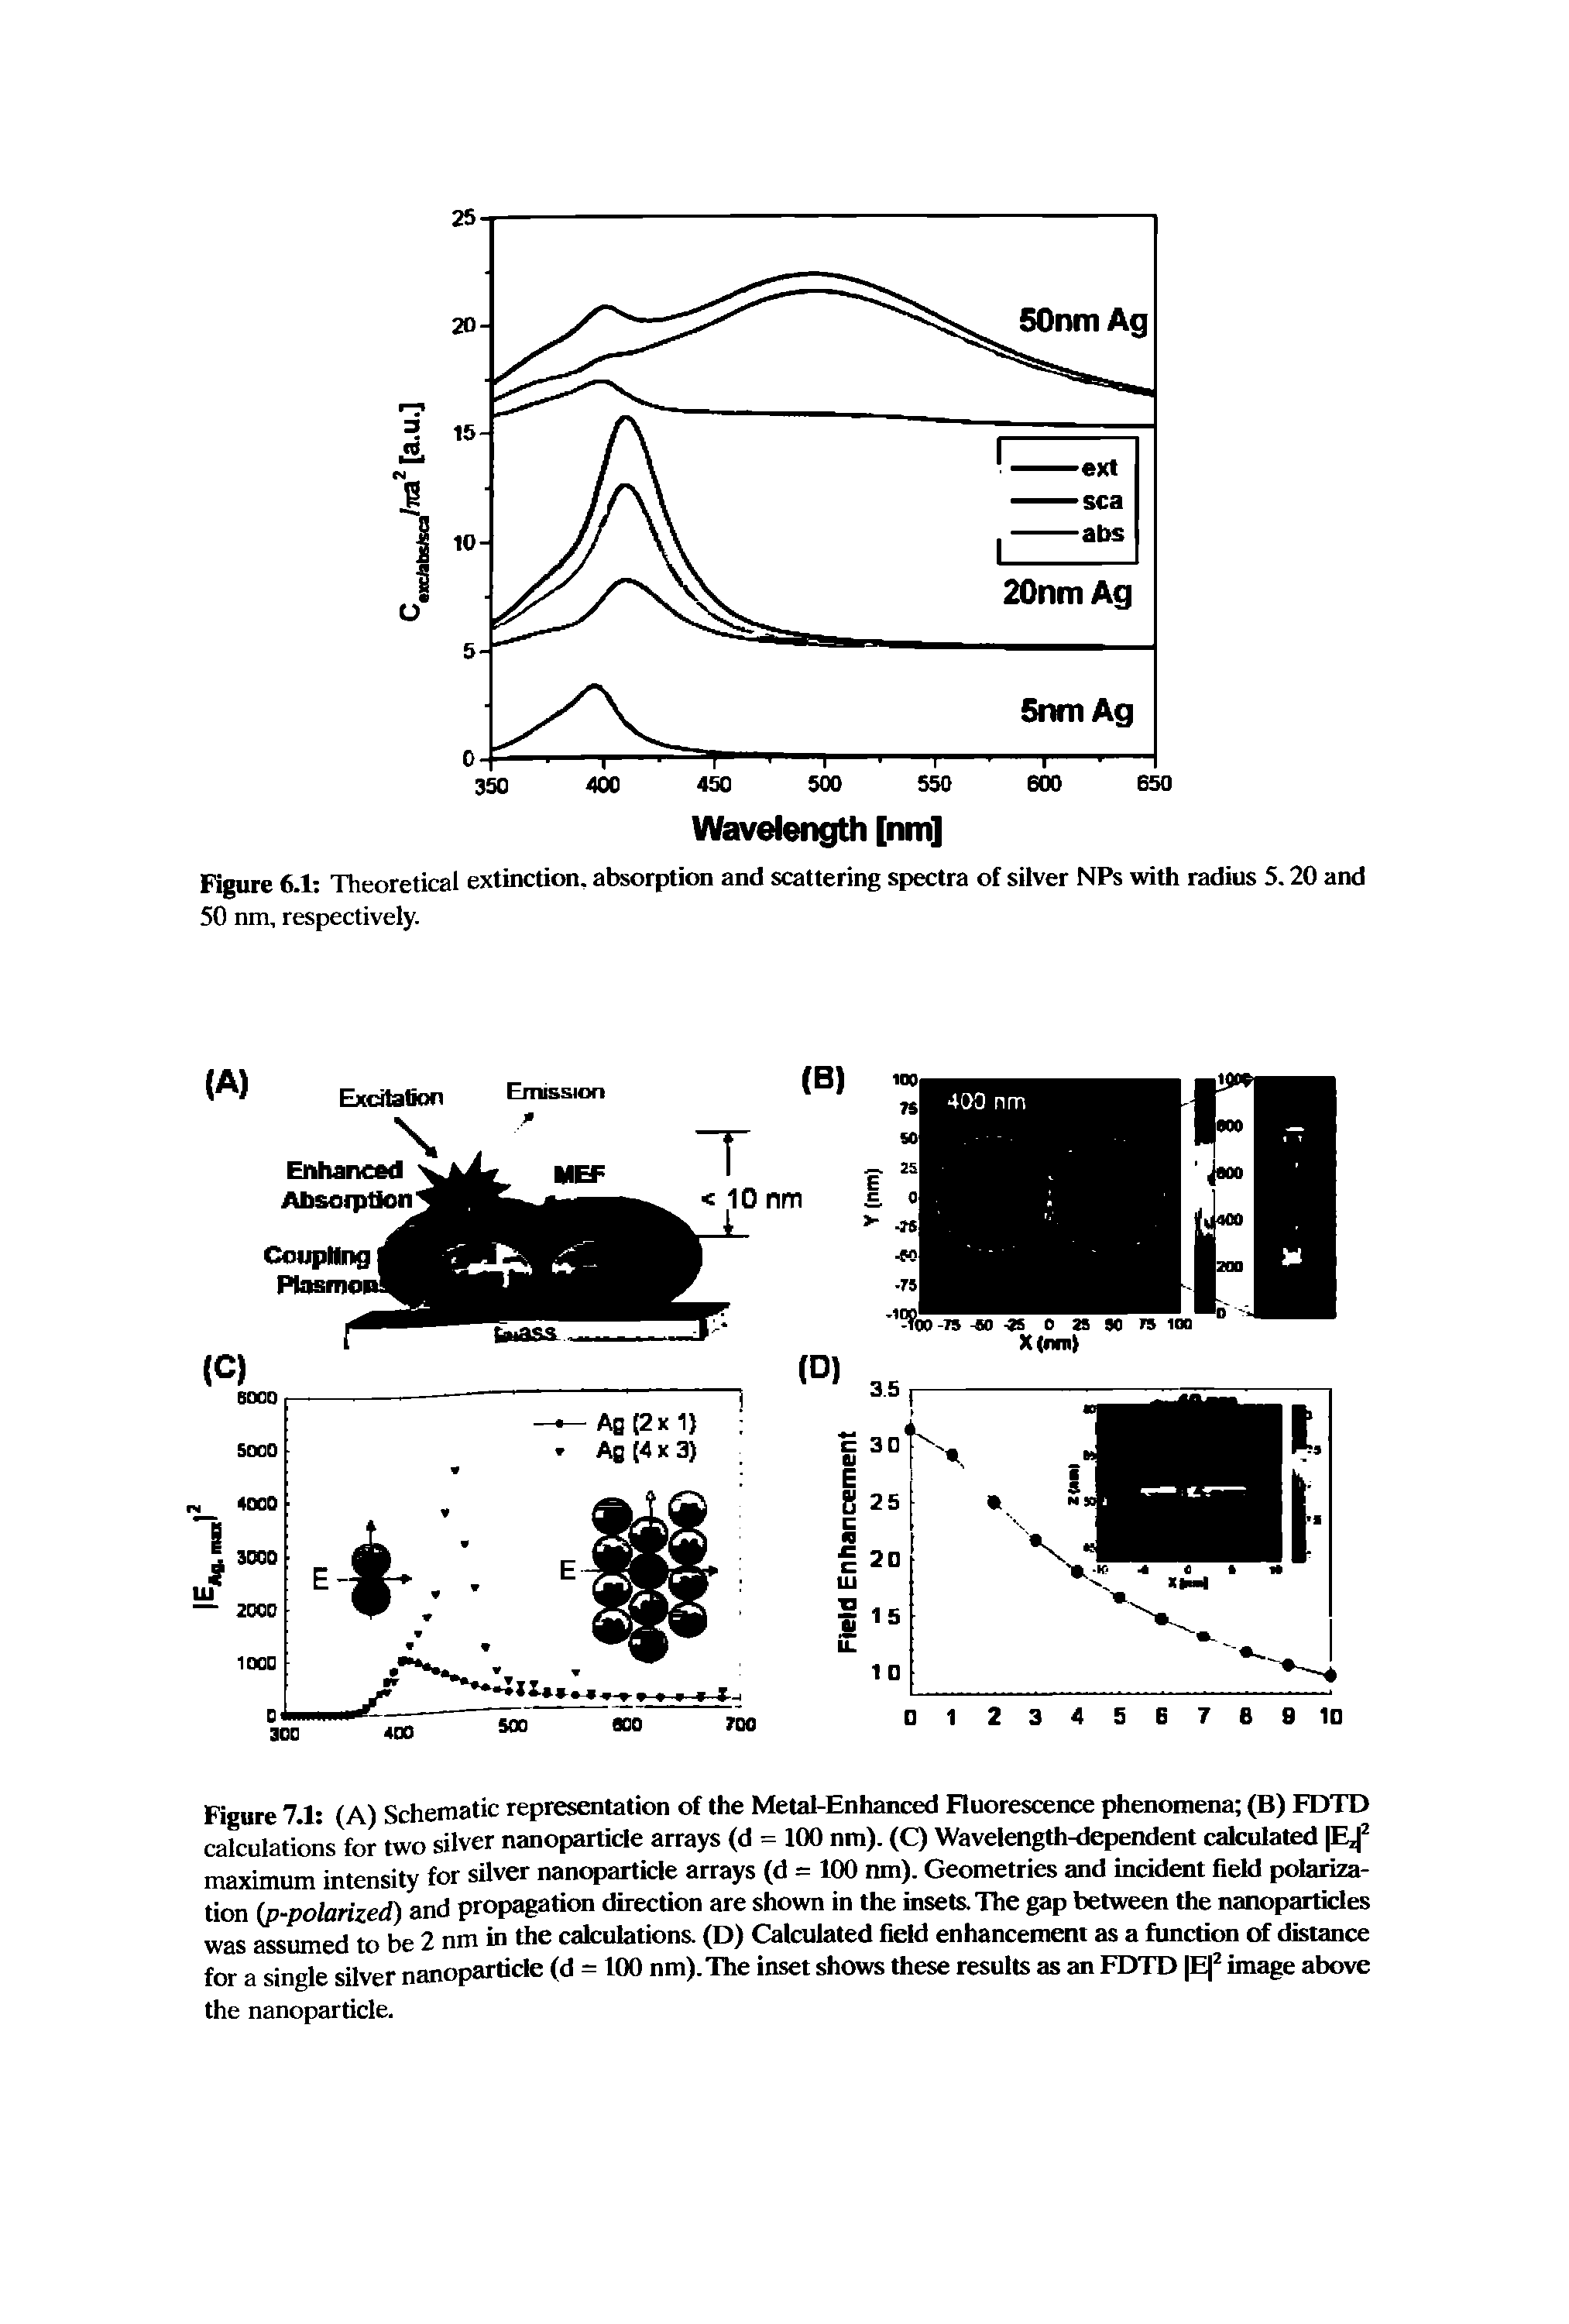 Figure 7.1 (A) Schematic representation of the Metal-Enhanced Fluorescence phenomena (B) FDTD calculations for two silver nanoparticle arrays (d = 100 nm). (C) Wavelength-dependent calculated Ej maximum intensity for silver nanoparticle arrays (d = 100 nm). Geometries and incident field polarization [p-polarized) and propagation direction are shown in the insets. The gap between the nanopaiticles was assumed to be 2 nm in the calculations. (D) Calculated field enhancement as a function of distance for a single silver nanoparticle (d = 100 nm).The inset shows these results as an FDTD E image above the nanoparticle.